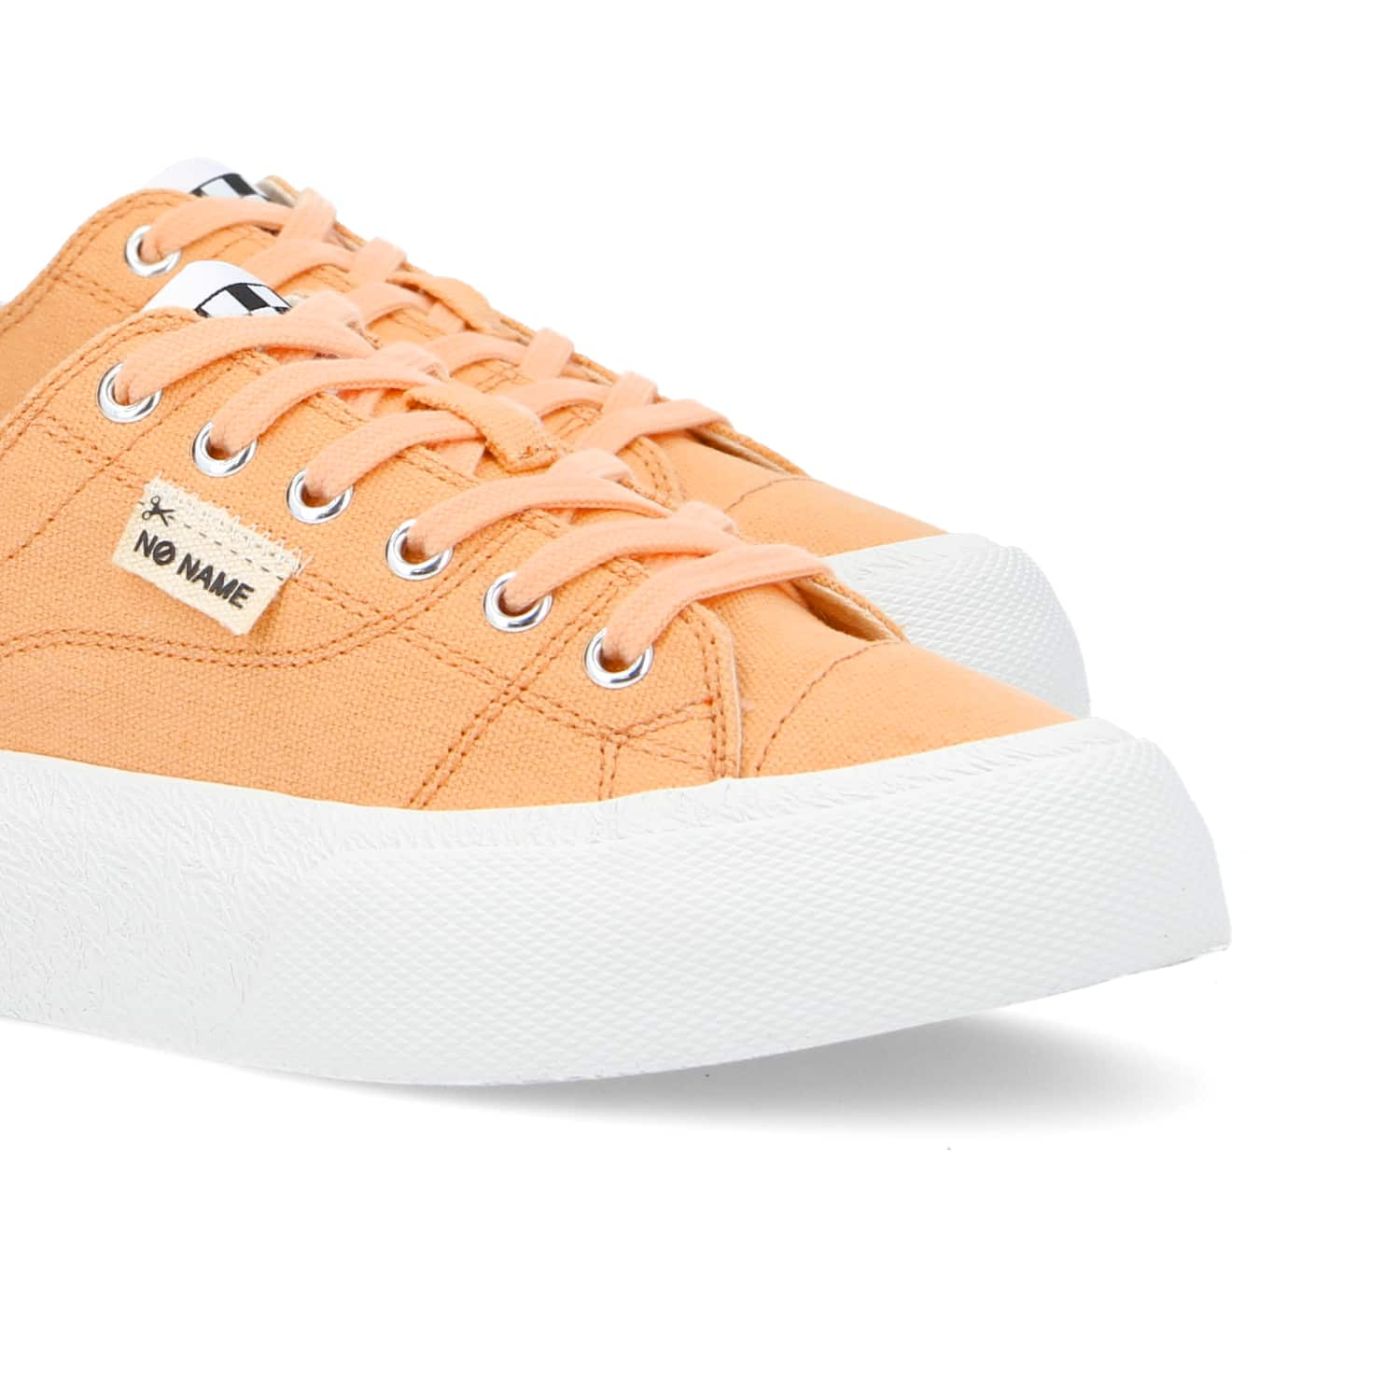 RESET SNEAKER W - CANVAS RECYCLED - APRICOT